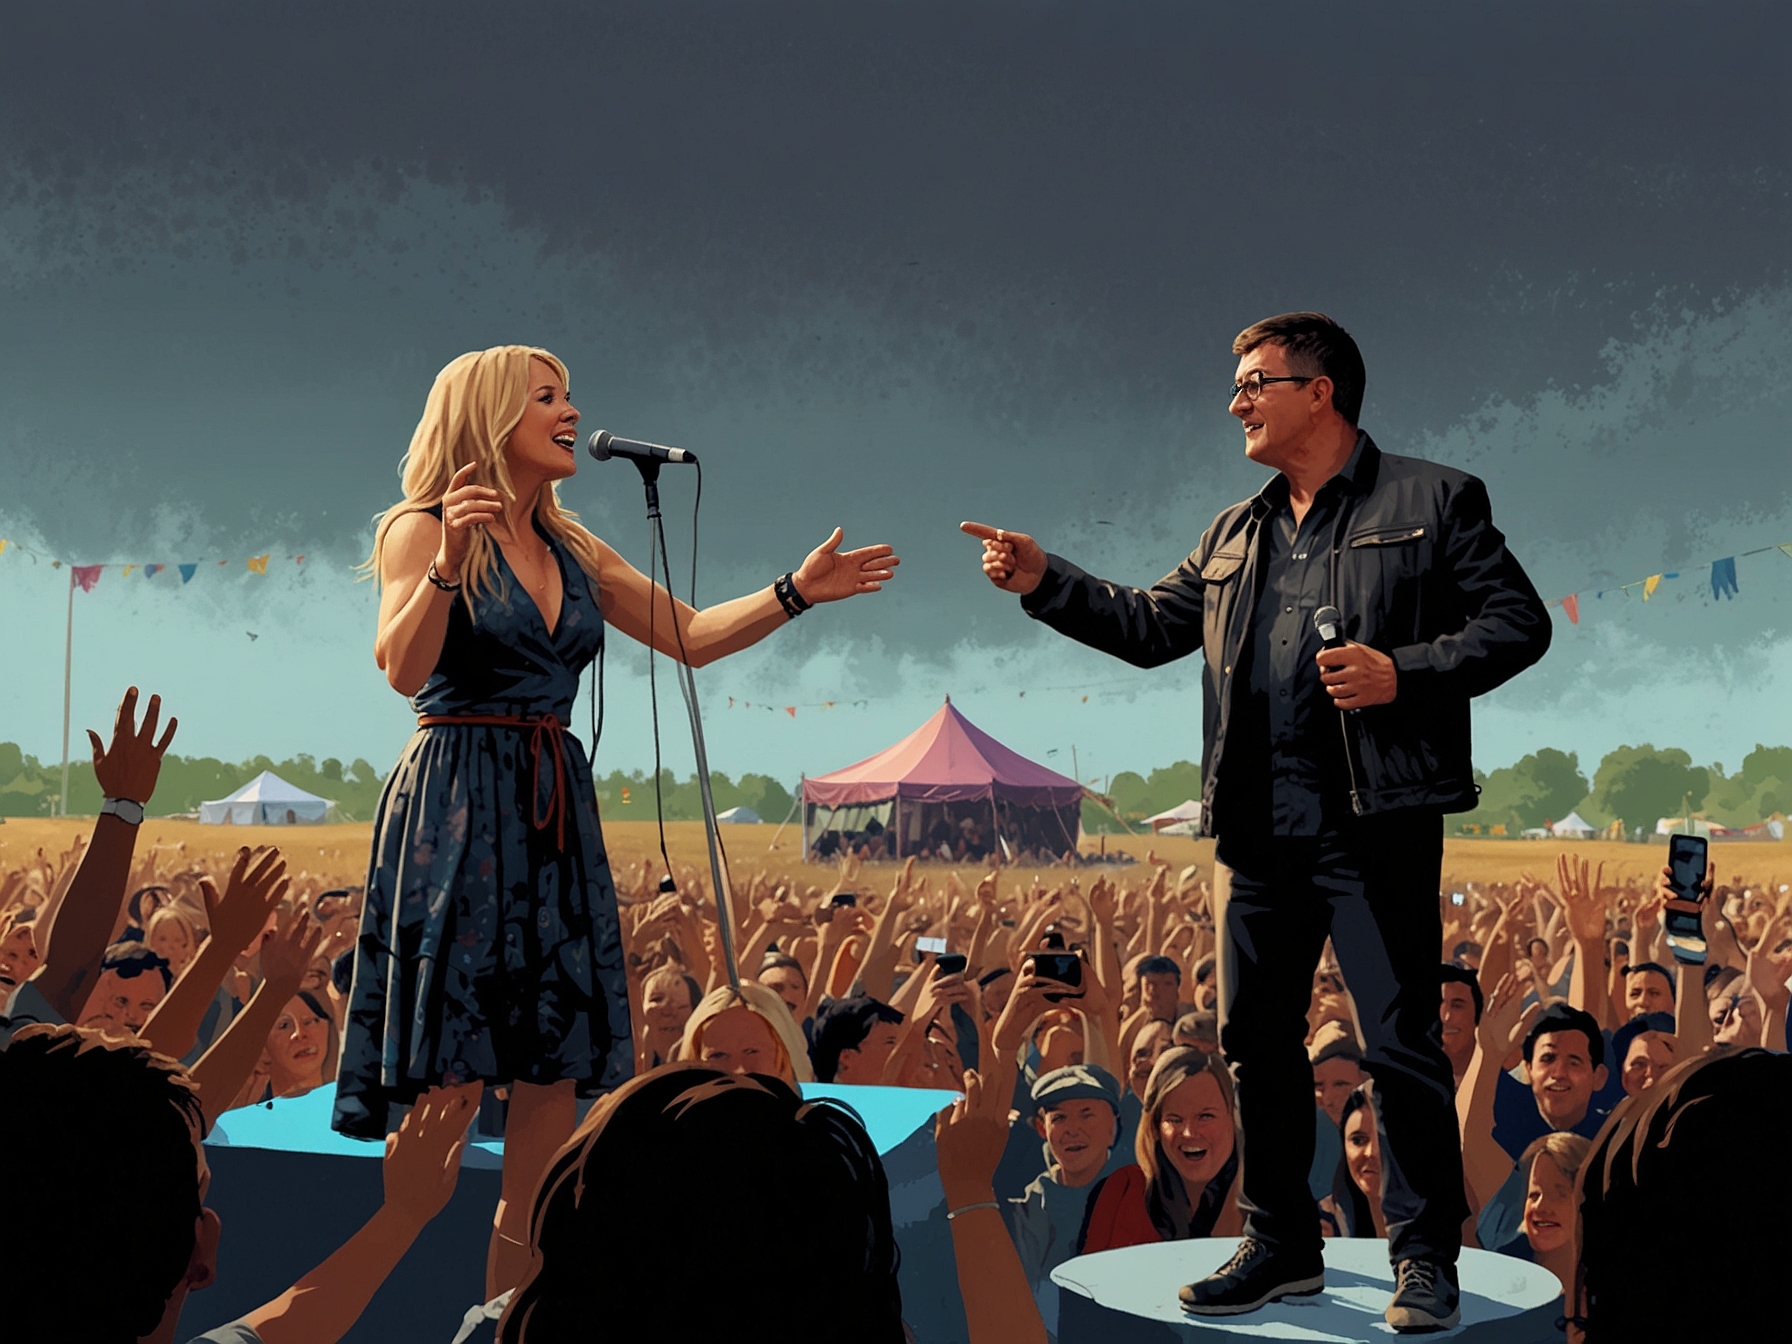 Rianne Downey and Paul Heaton share the stage at Glastonbury, their voices blending harmoniously against the backdrop of an enthusiastic crowd, capturing the essence of the festival's magic.